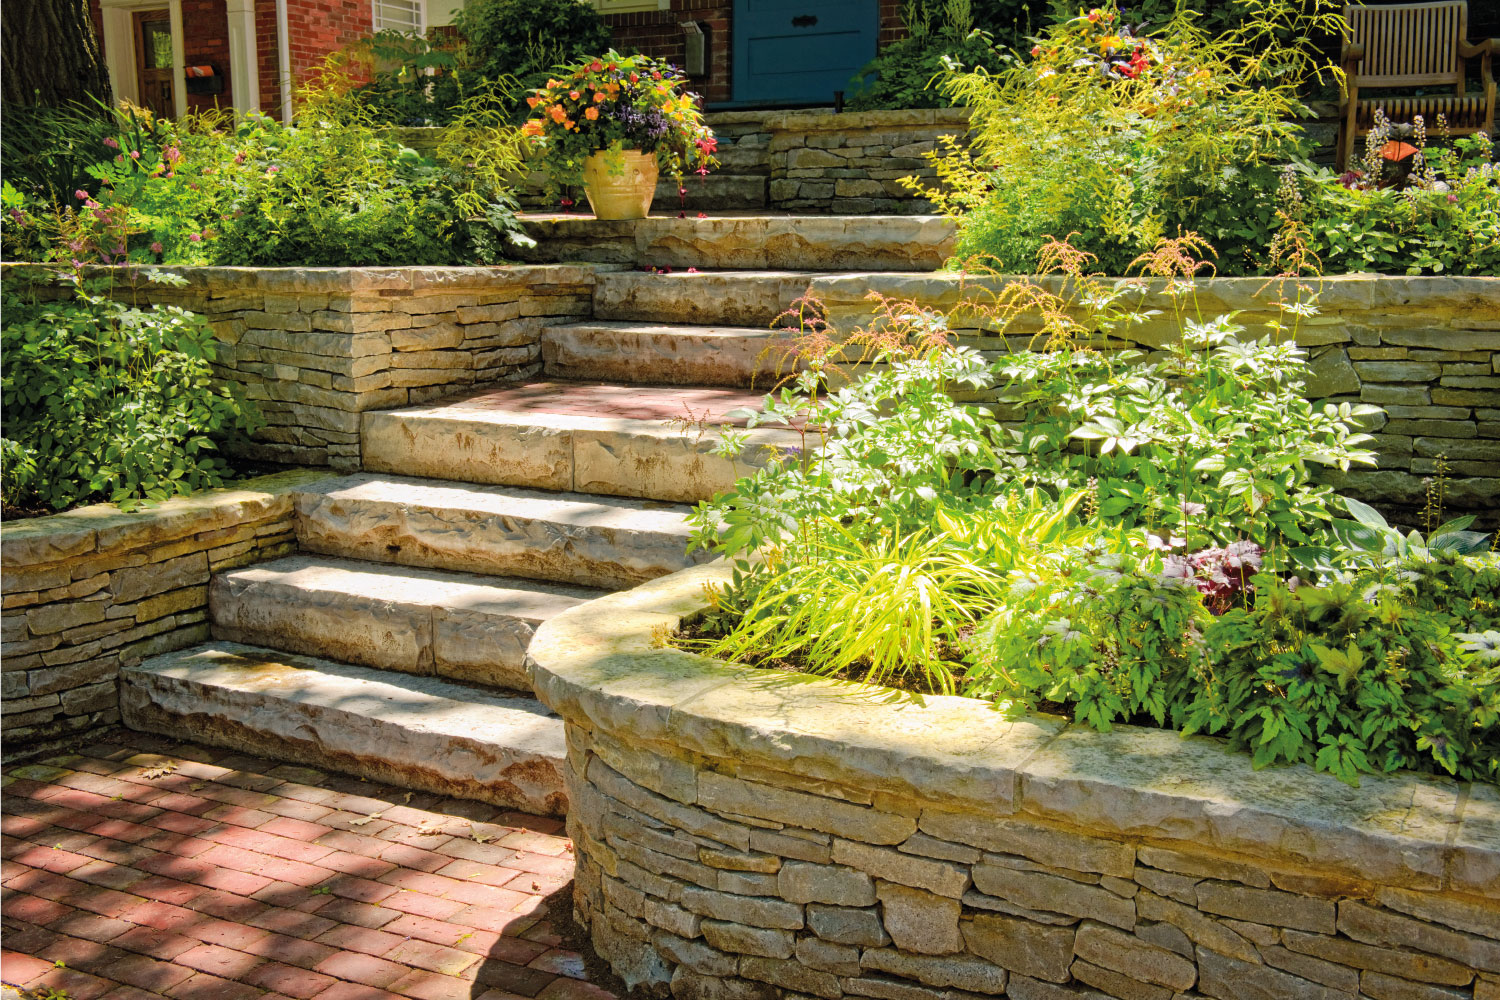 Natural stone landscaping in home garden with stairs, natural stone retaining wall